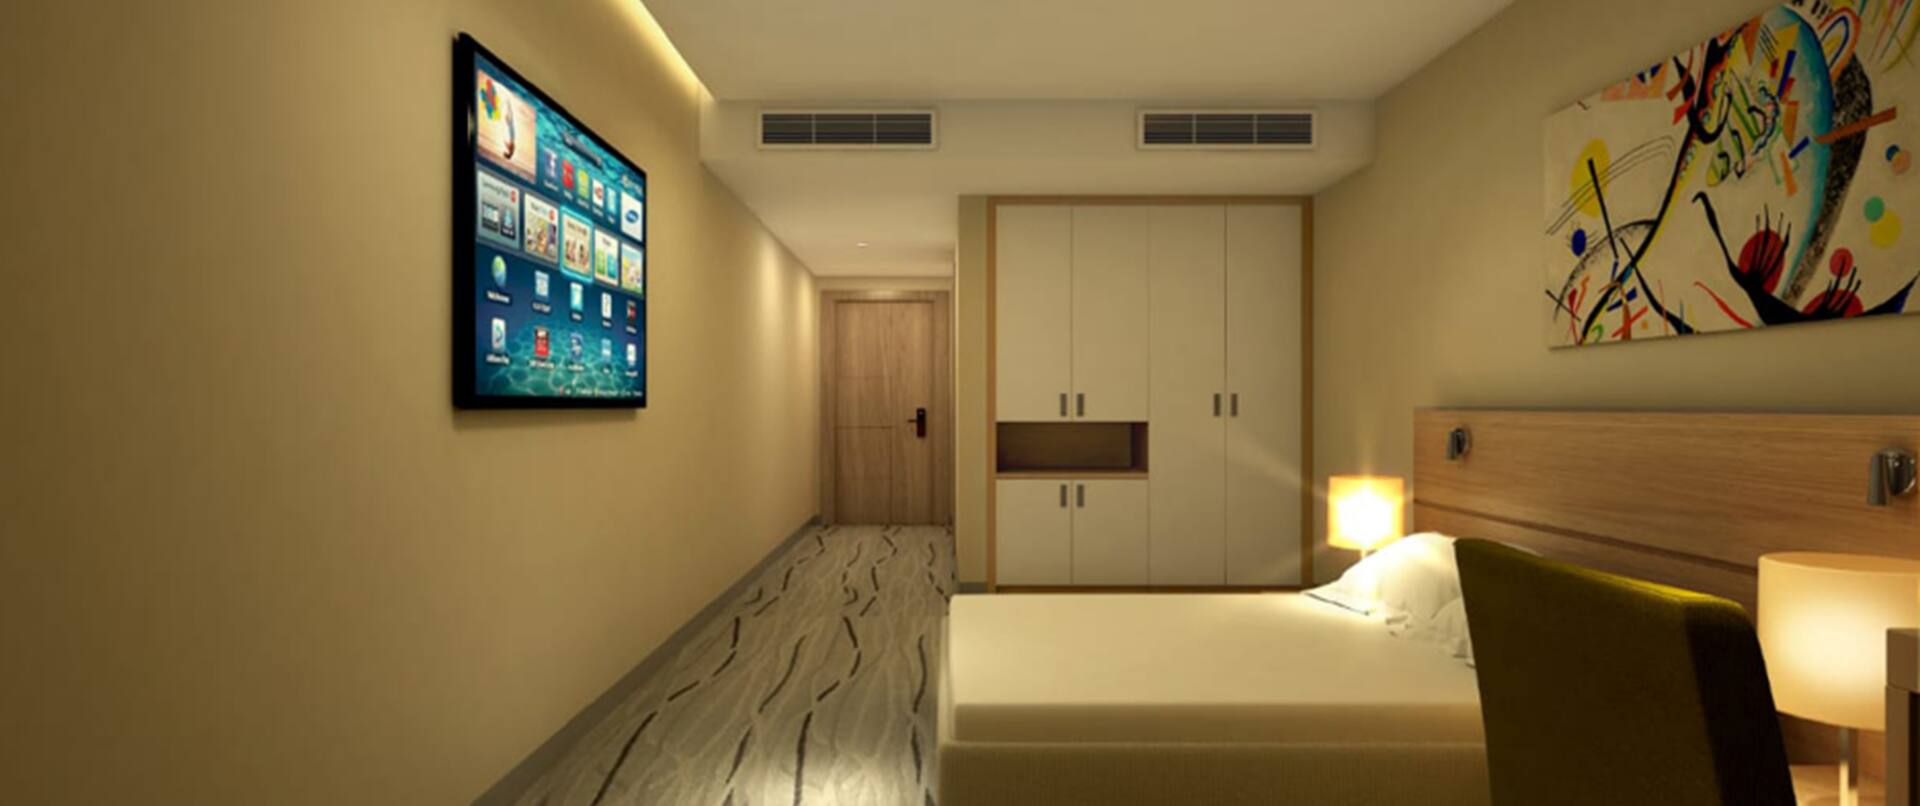 Single bedroom with wall mounted TV